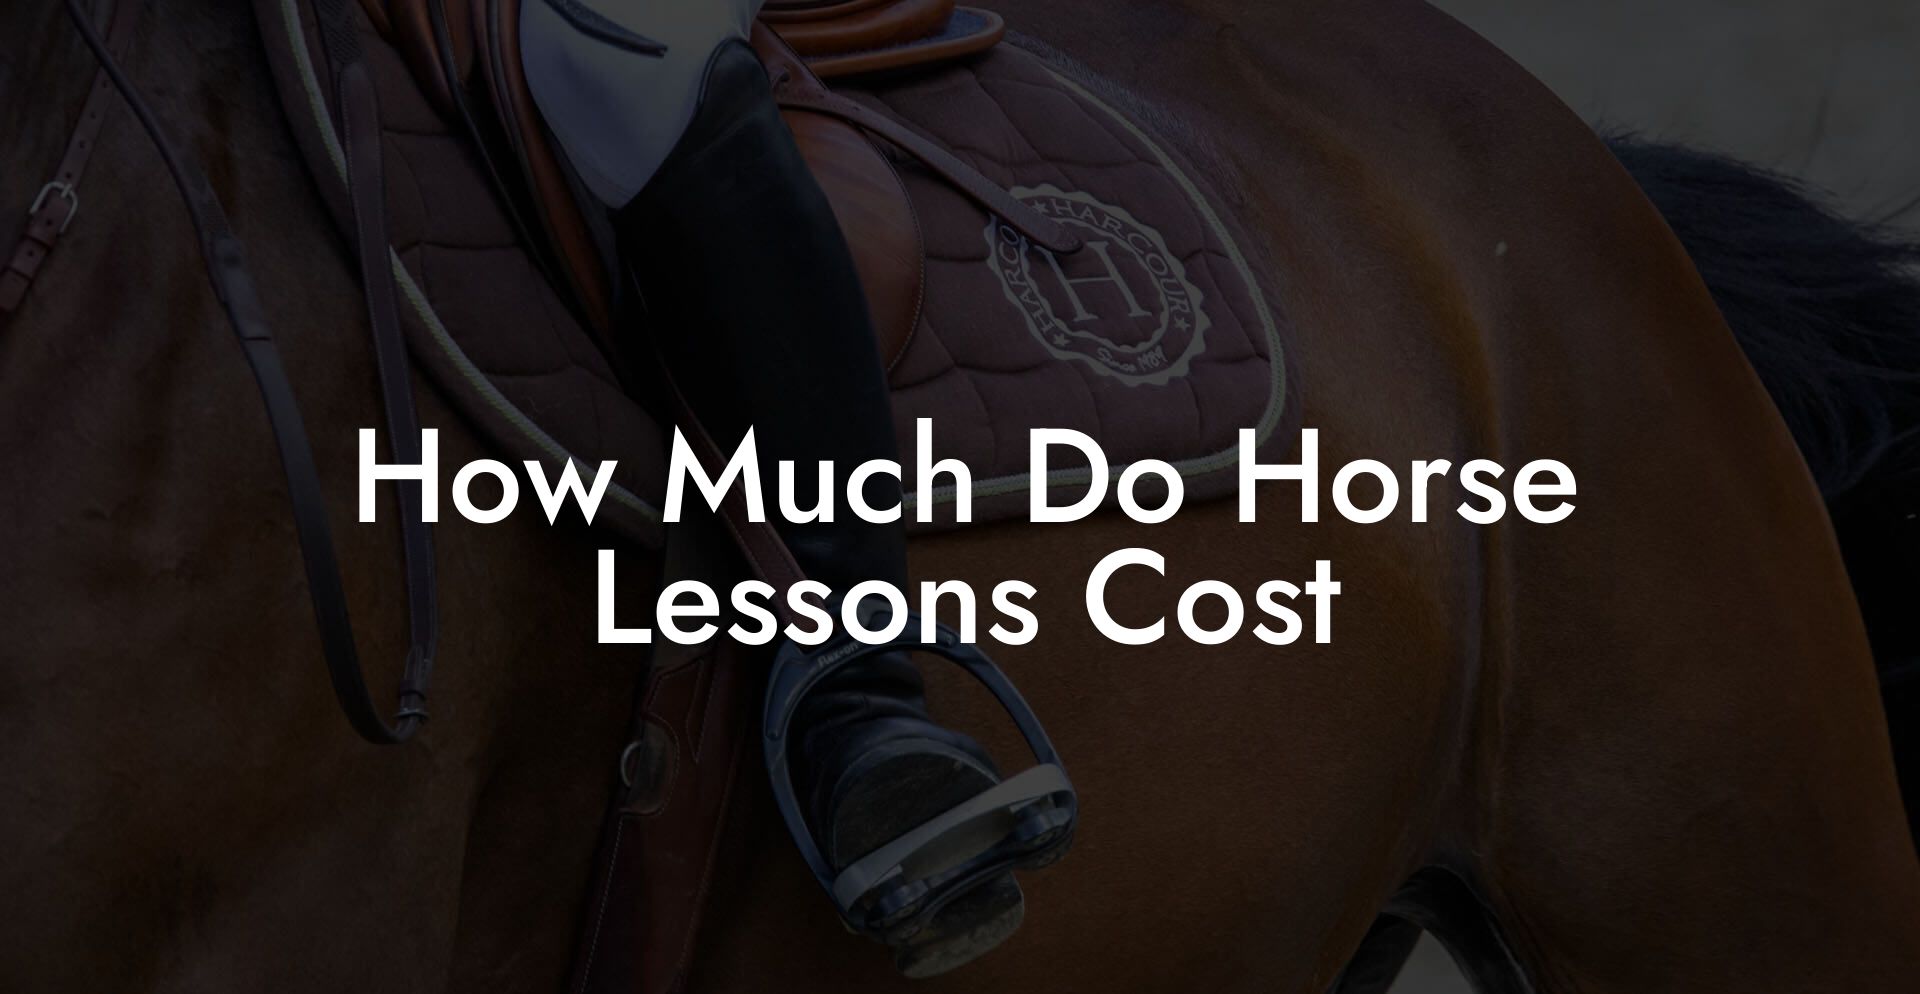 How Much Do Horse Lessons Cost